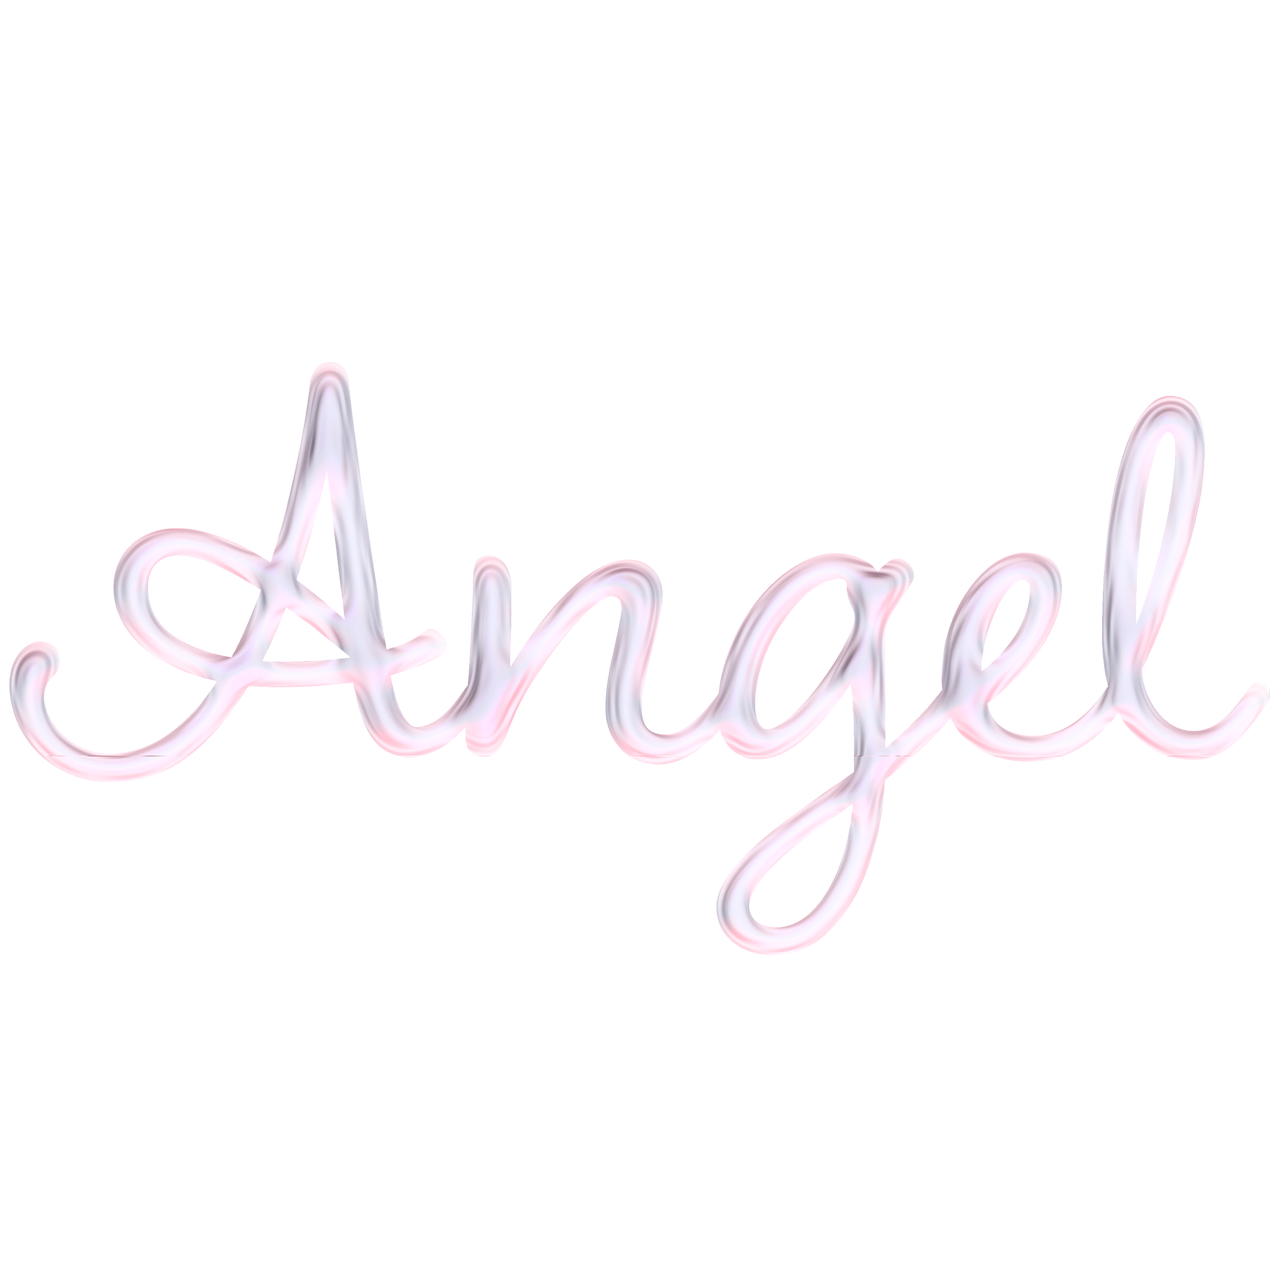 Download Free Photo Of Word Art Angel Glass Transparent Word From Needpix Com